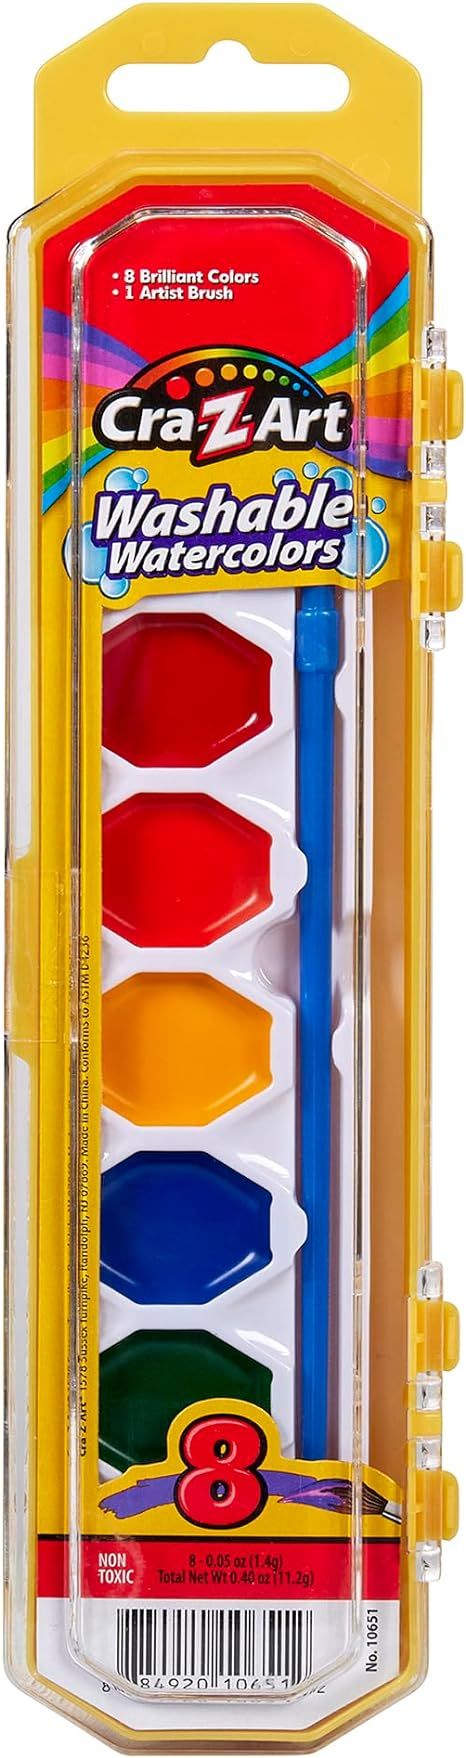 Cra-Z-art Washable Watercolors with Brush, 8 Colors, 1 Tray (10651) | Amazon (US)